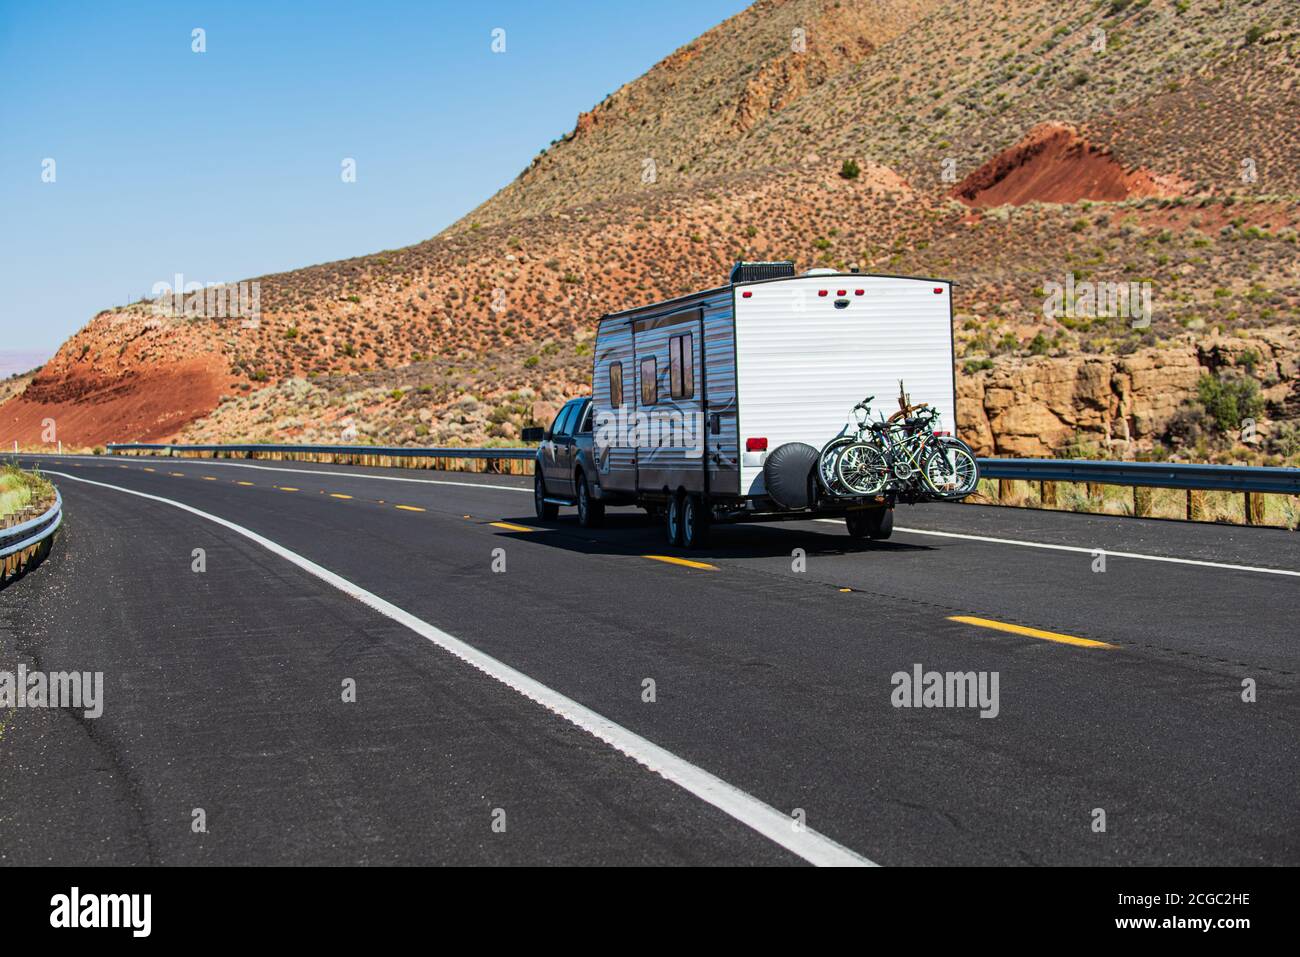 Mohave desert by Route 66. RV Camping, Camper Van on road. Caravan or  recreational vehicle motor home trailer on a mountain road in America Stock  Photo - Alamy